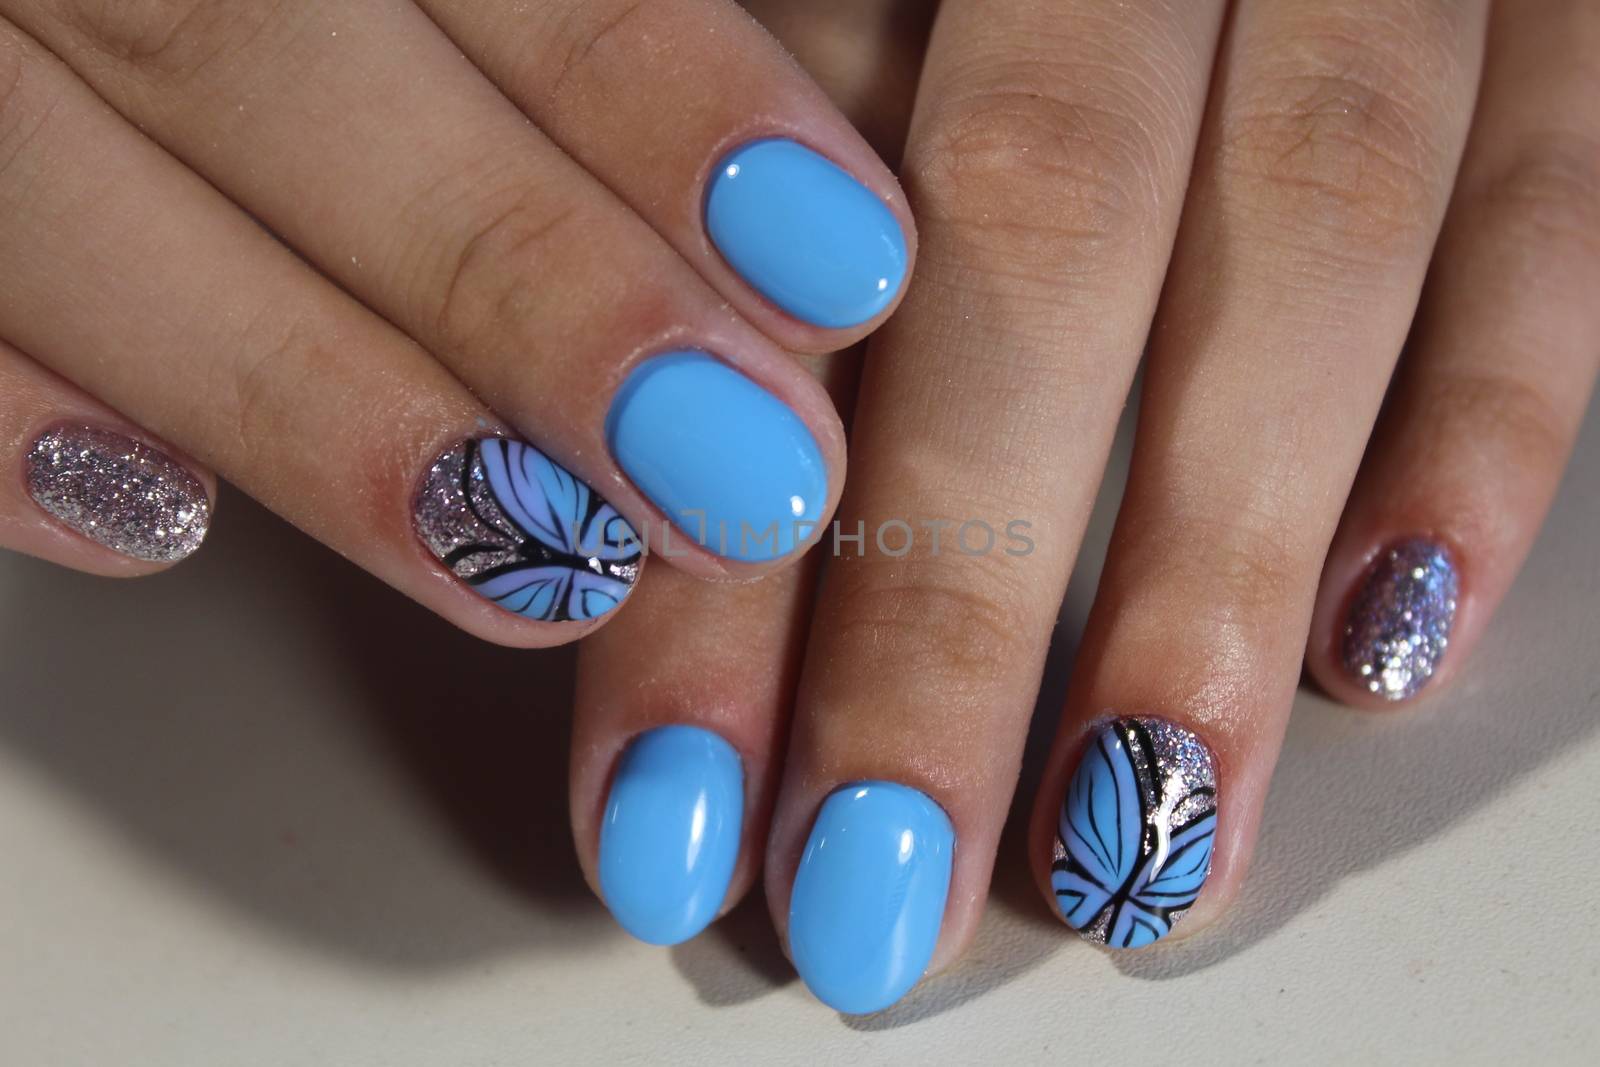 Manicure design with a pattern on the nails